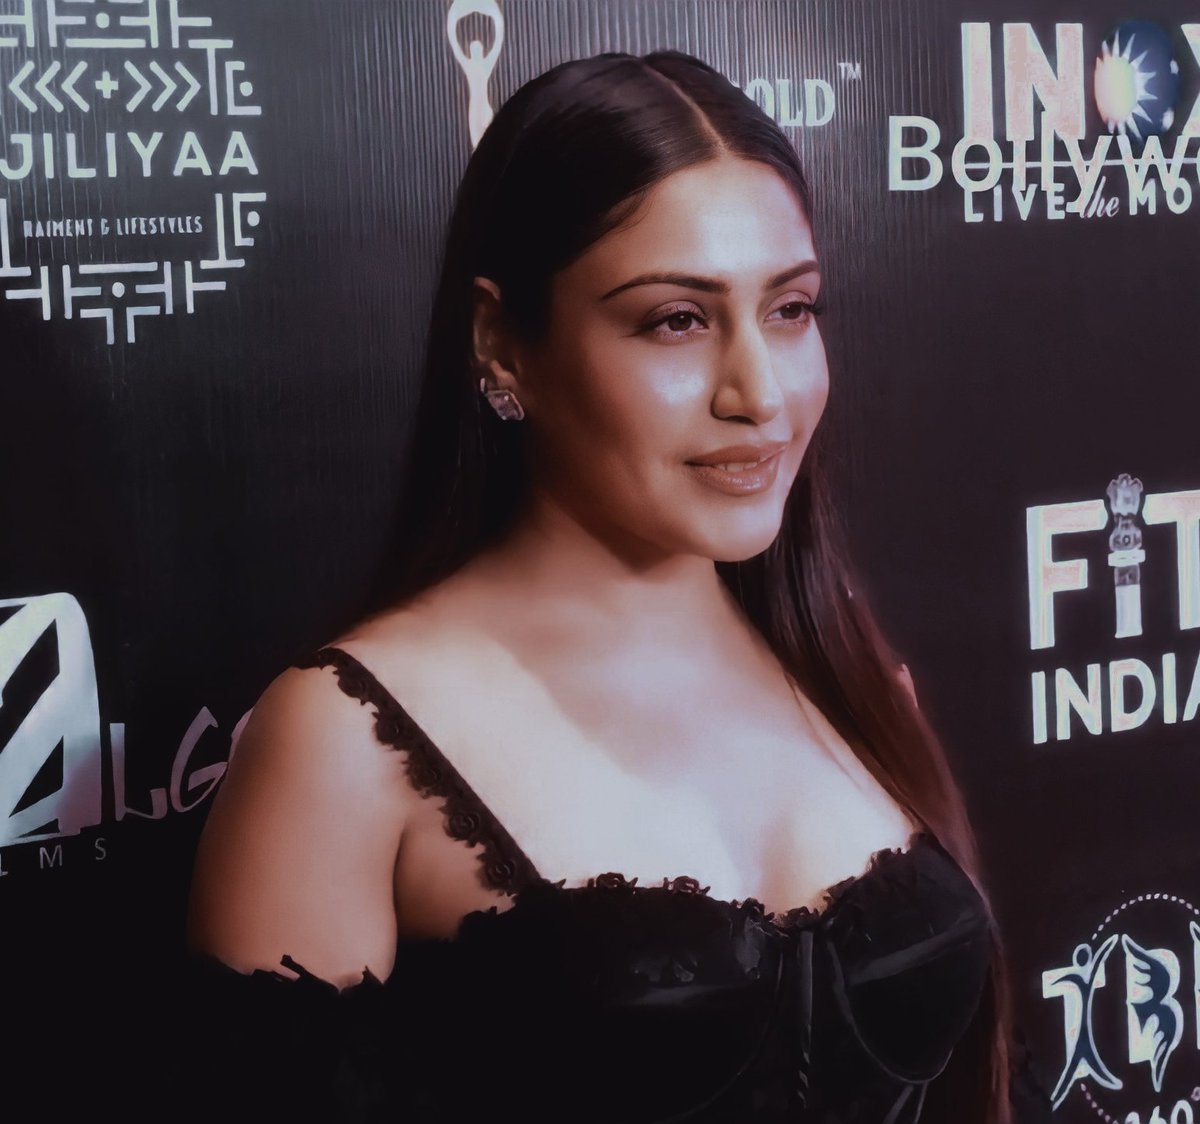 Yaa most popular actress of the year 💃💃💃🧿🧿
#SurbhiChandna
#IconicGoldAwards2021